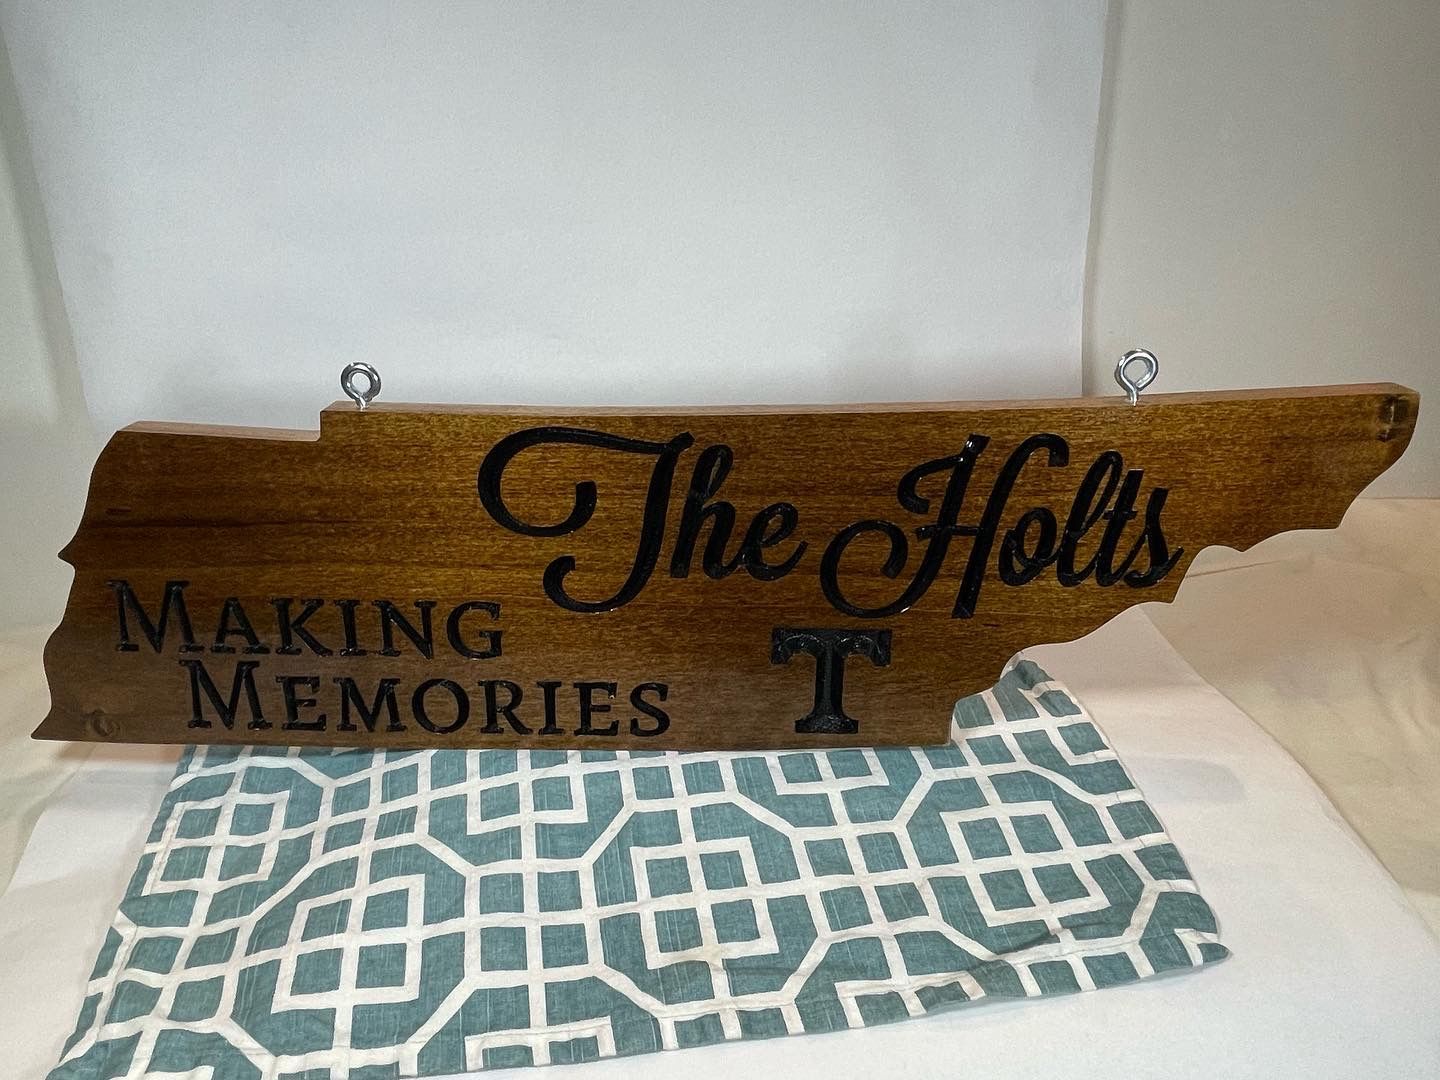 A wooden sign that says `` the holts making memories '' is sitting on a table.